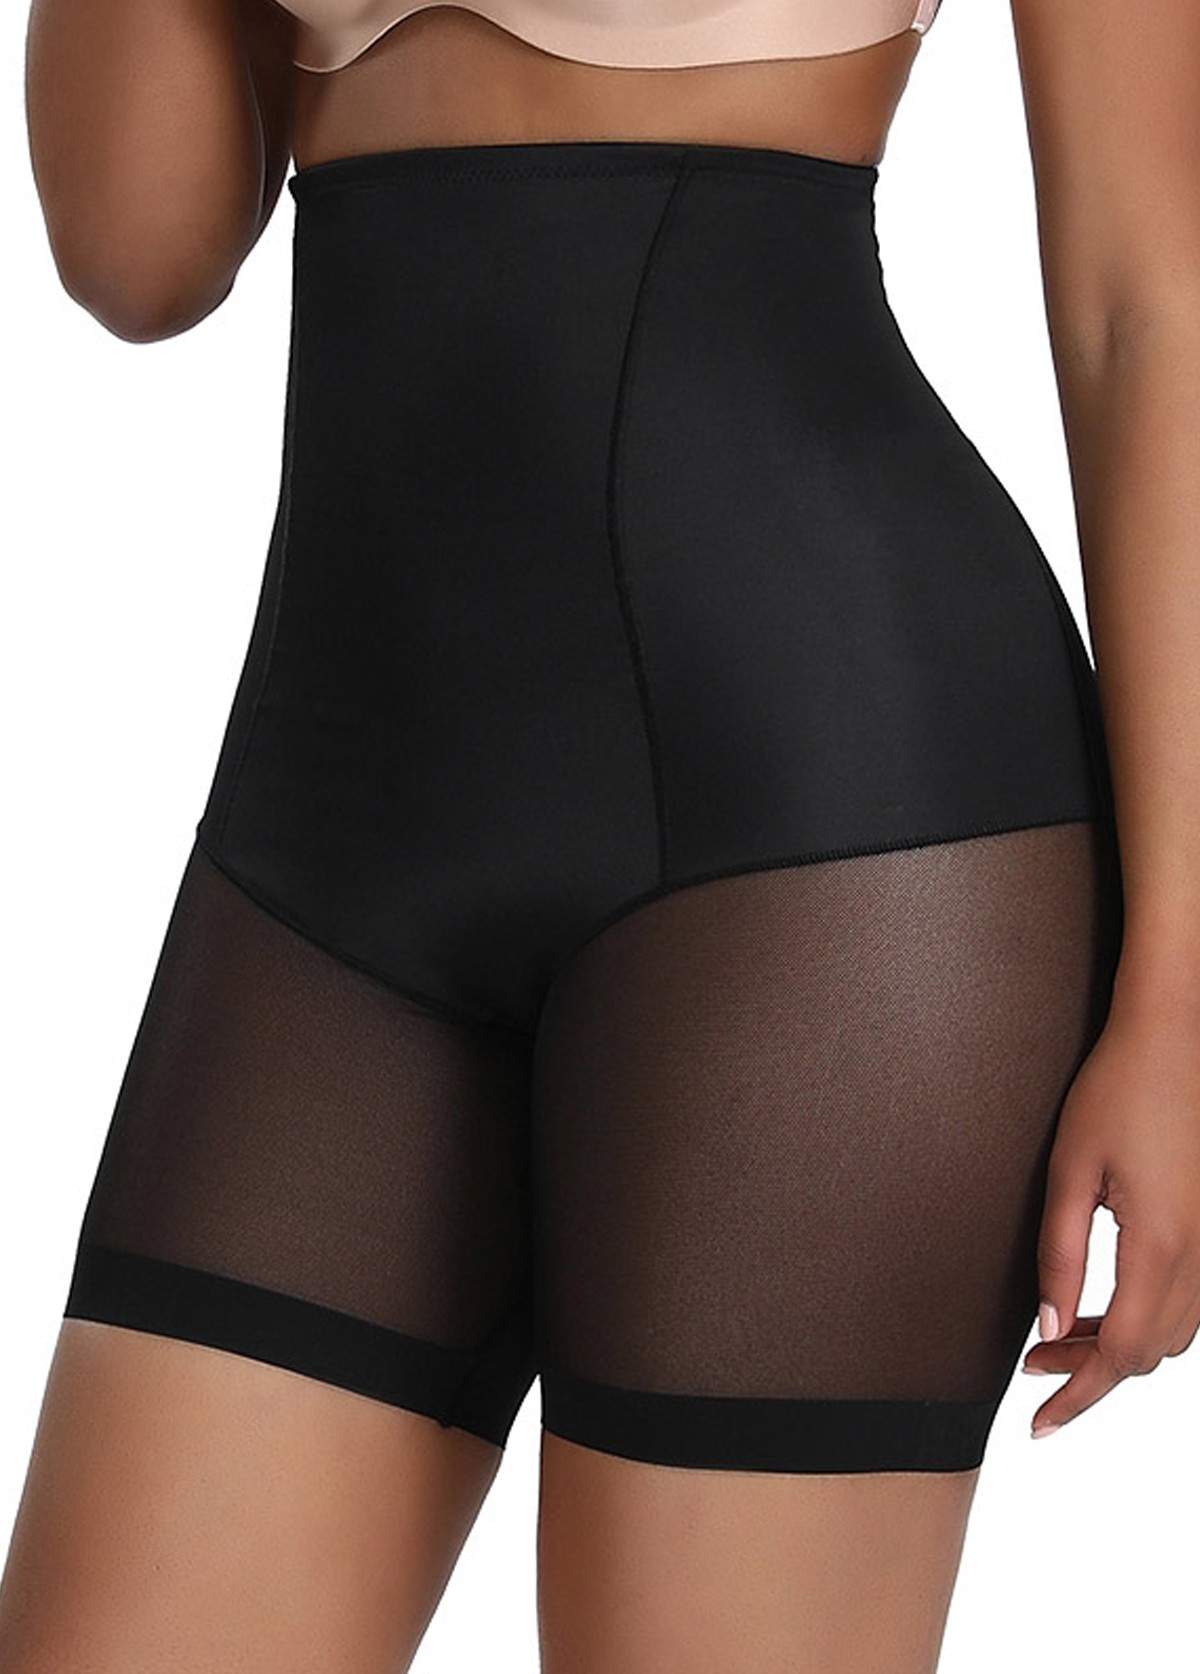 Black Solid High Waisted Panties